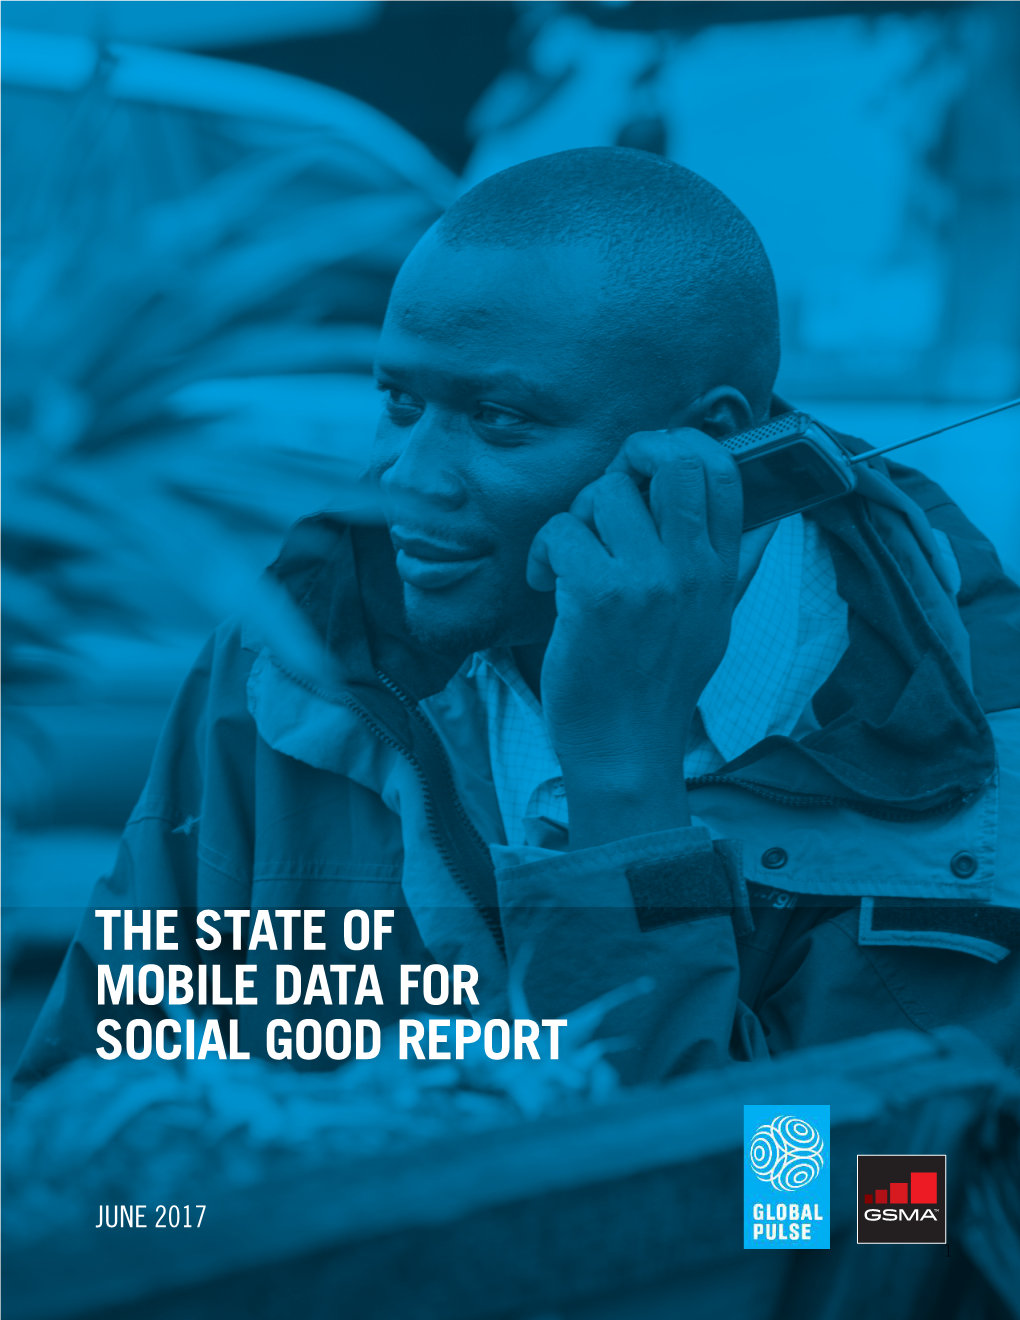 The State of Mobile Data for Social Good Report